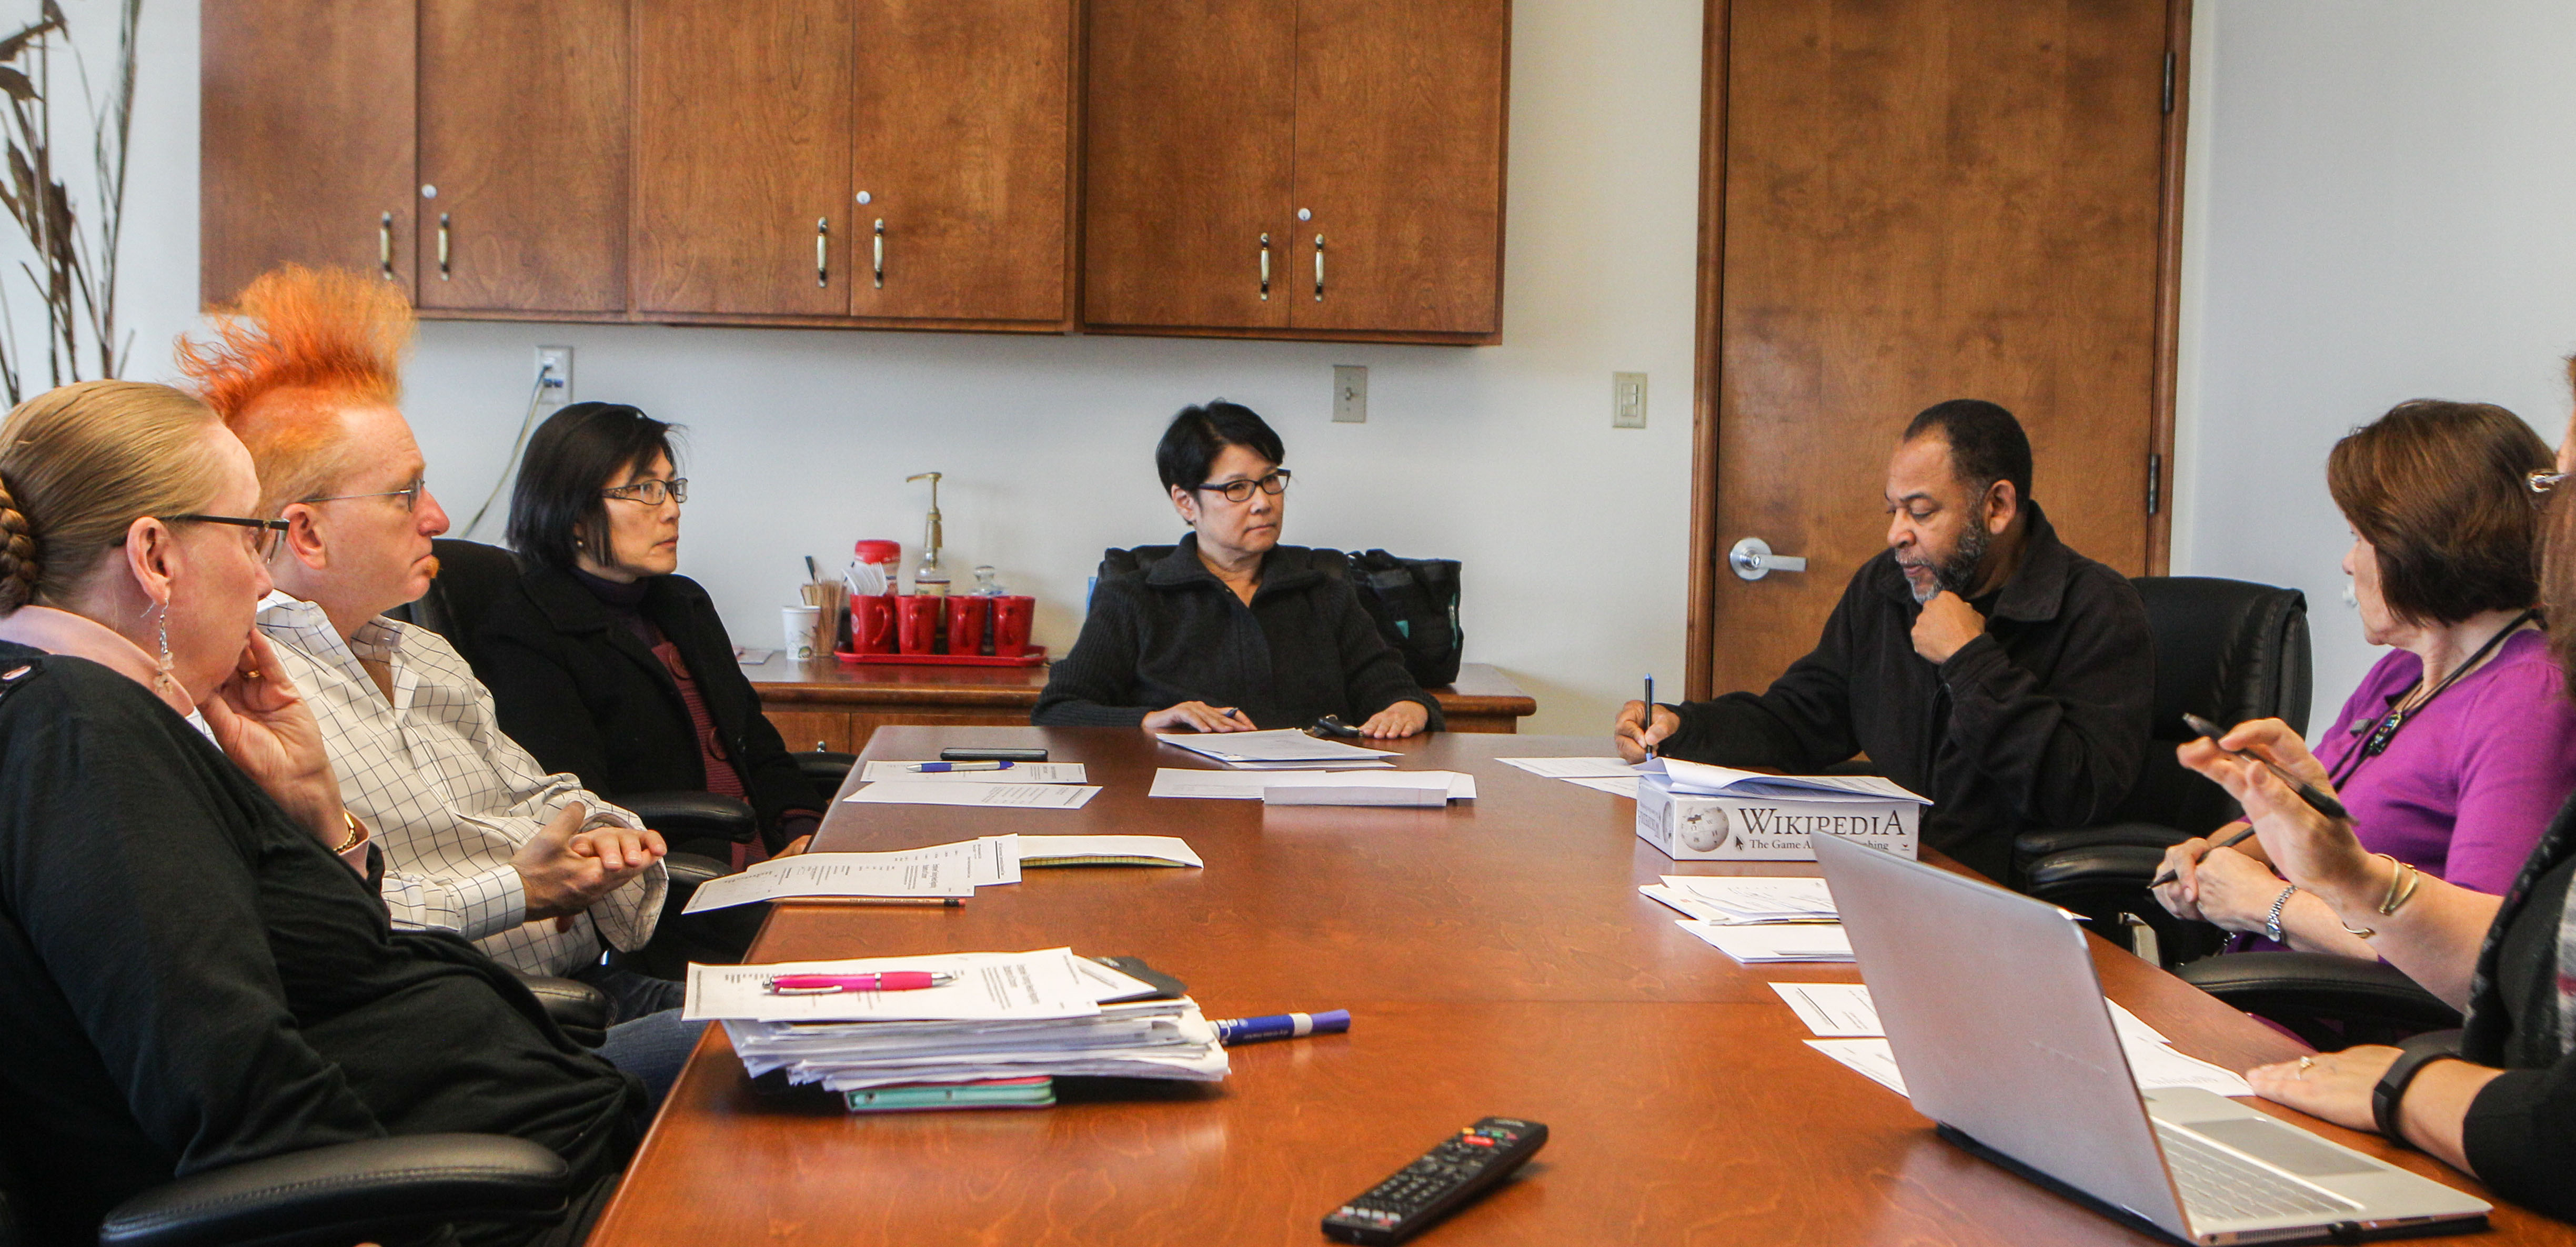 College Assessment Intervention and Response Team (CAIR) members meet at Conlan Hall on November 30, 2015. From left: Anne Mayer, faculty, James Rogers, Classified Senate, Minh-Hoa Ta, Dean of Chinatown North Beach Center, Jill Yee, Dean of School of Behavioral and Social Sciences and Multicultural Studies, Chief of Police Andre Barnes, and Becky Perelli, Dir. Of Student Health Services. (Photo by Franchon Welch/ The Guardsman)